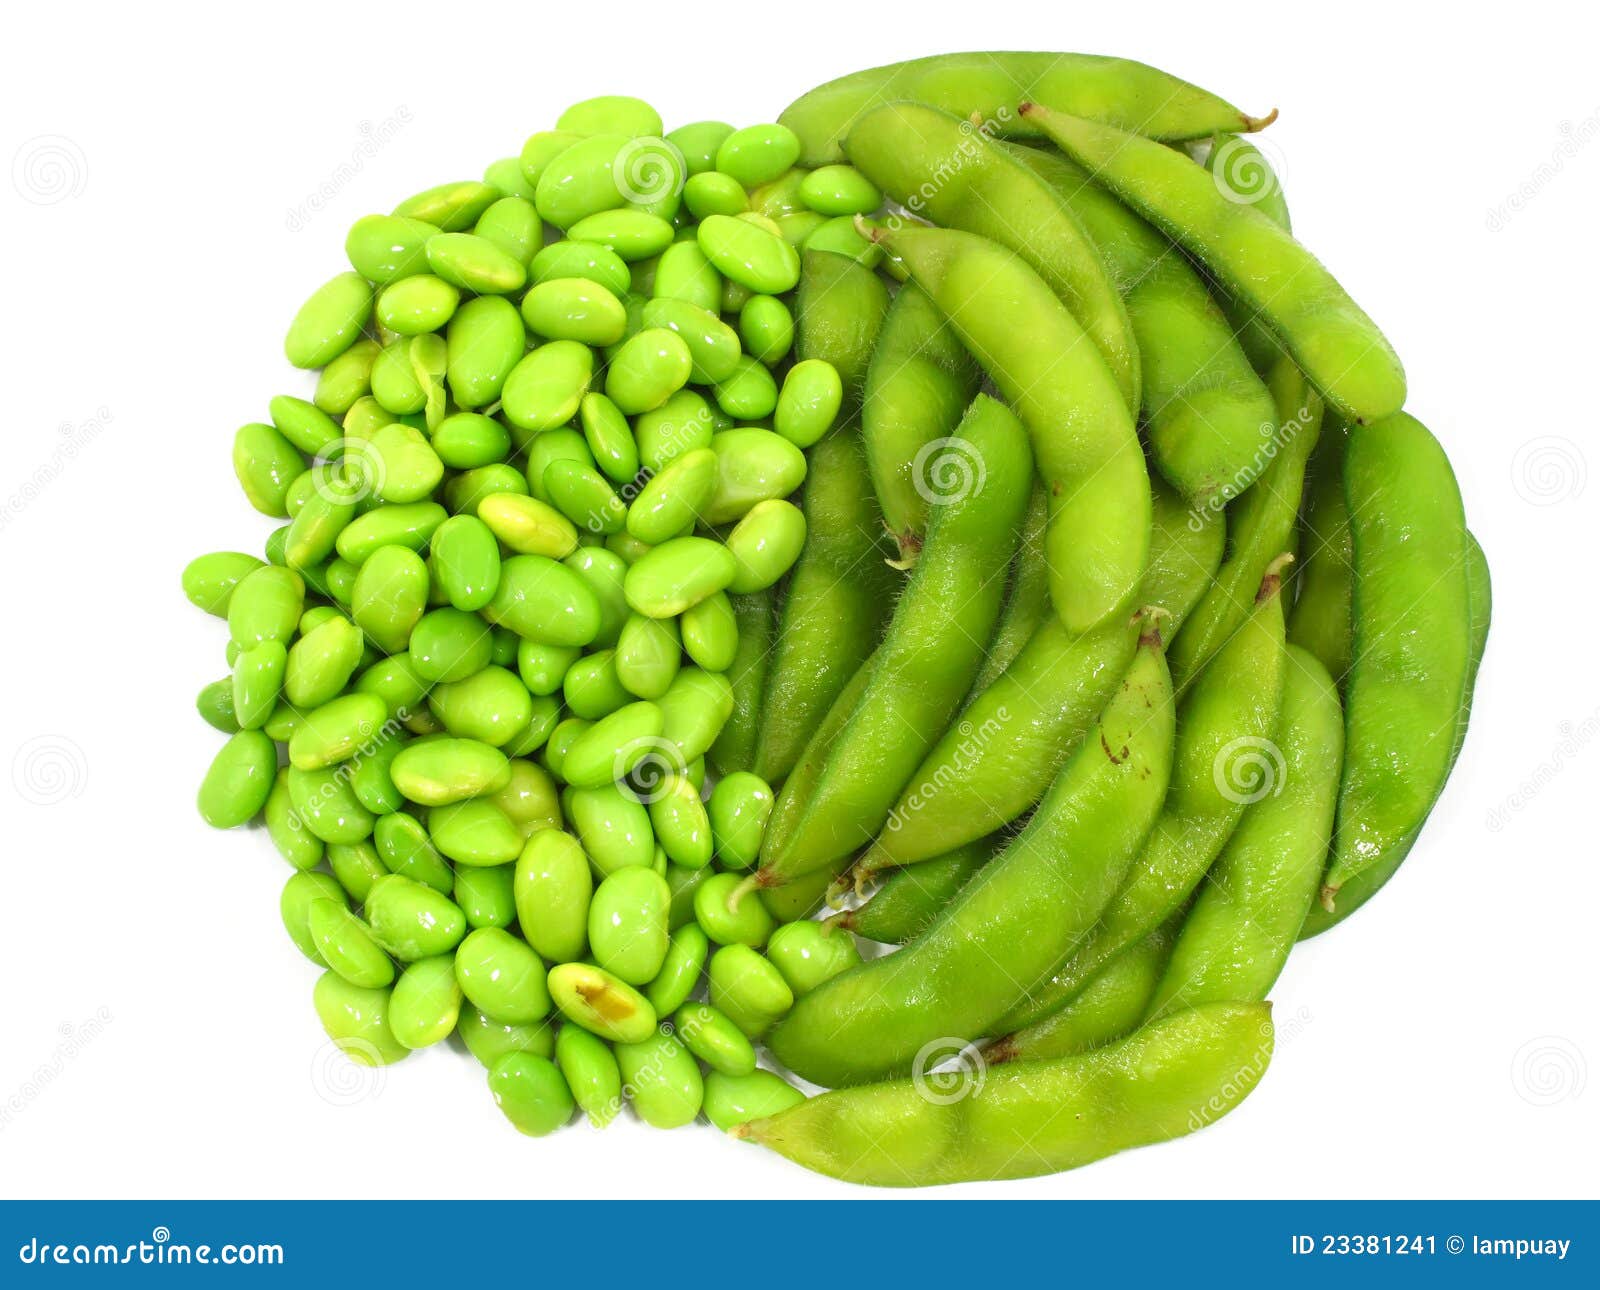 edamame soy beans shelled and pods